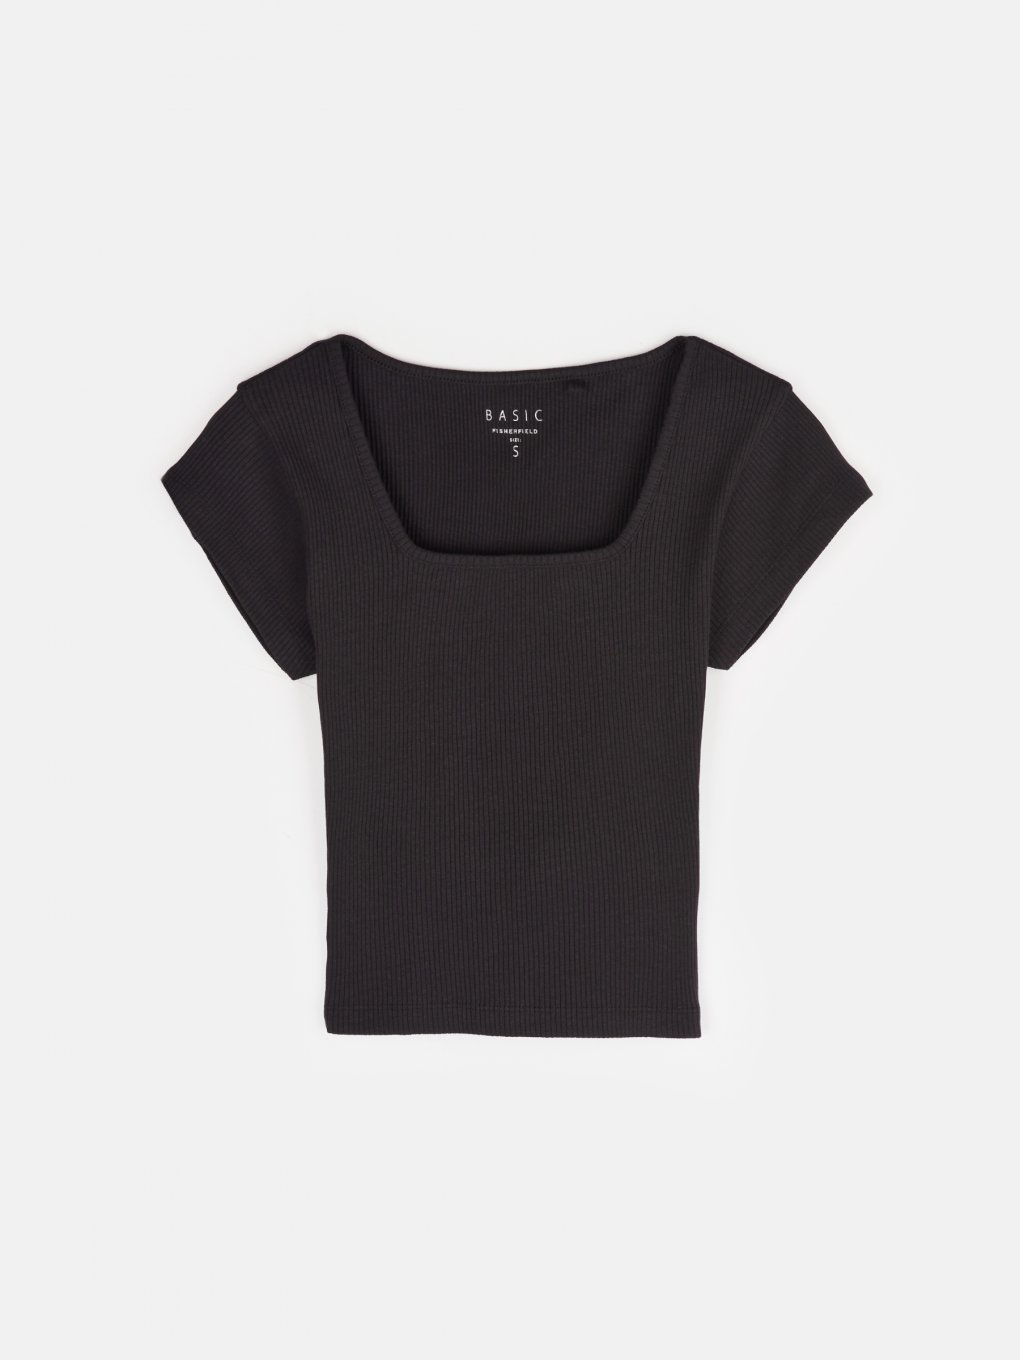 Square neck ribbed cotton crop top